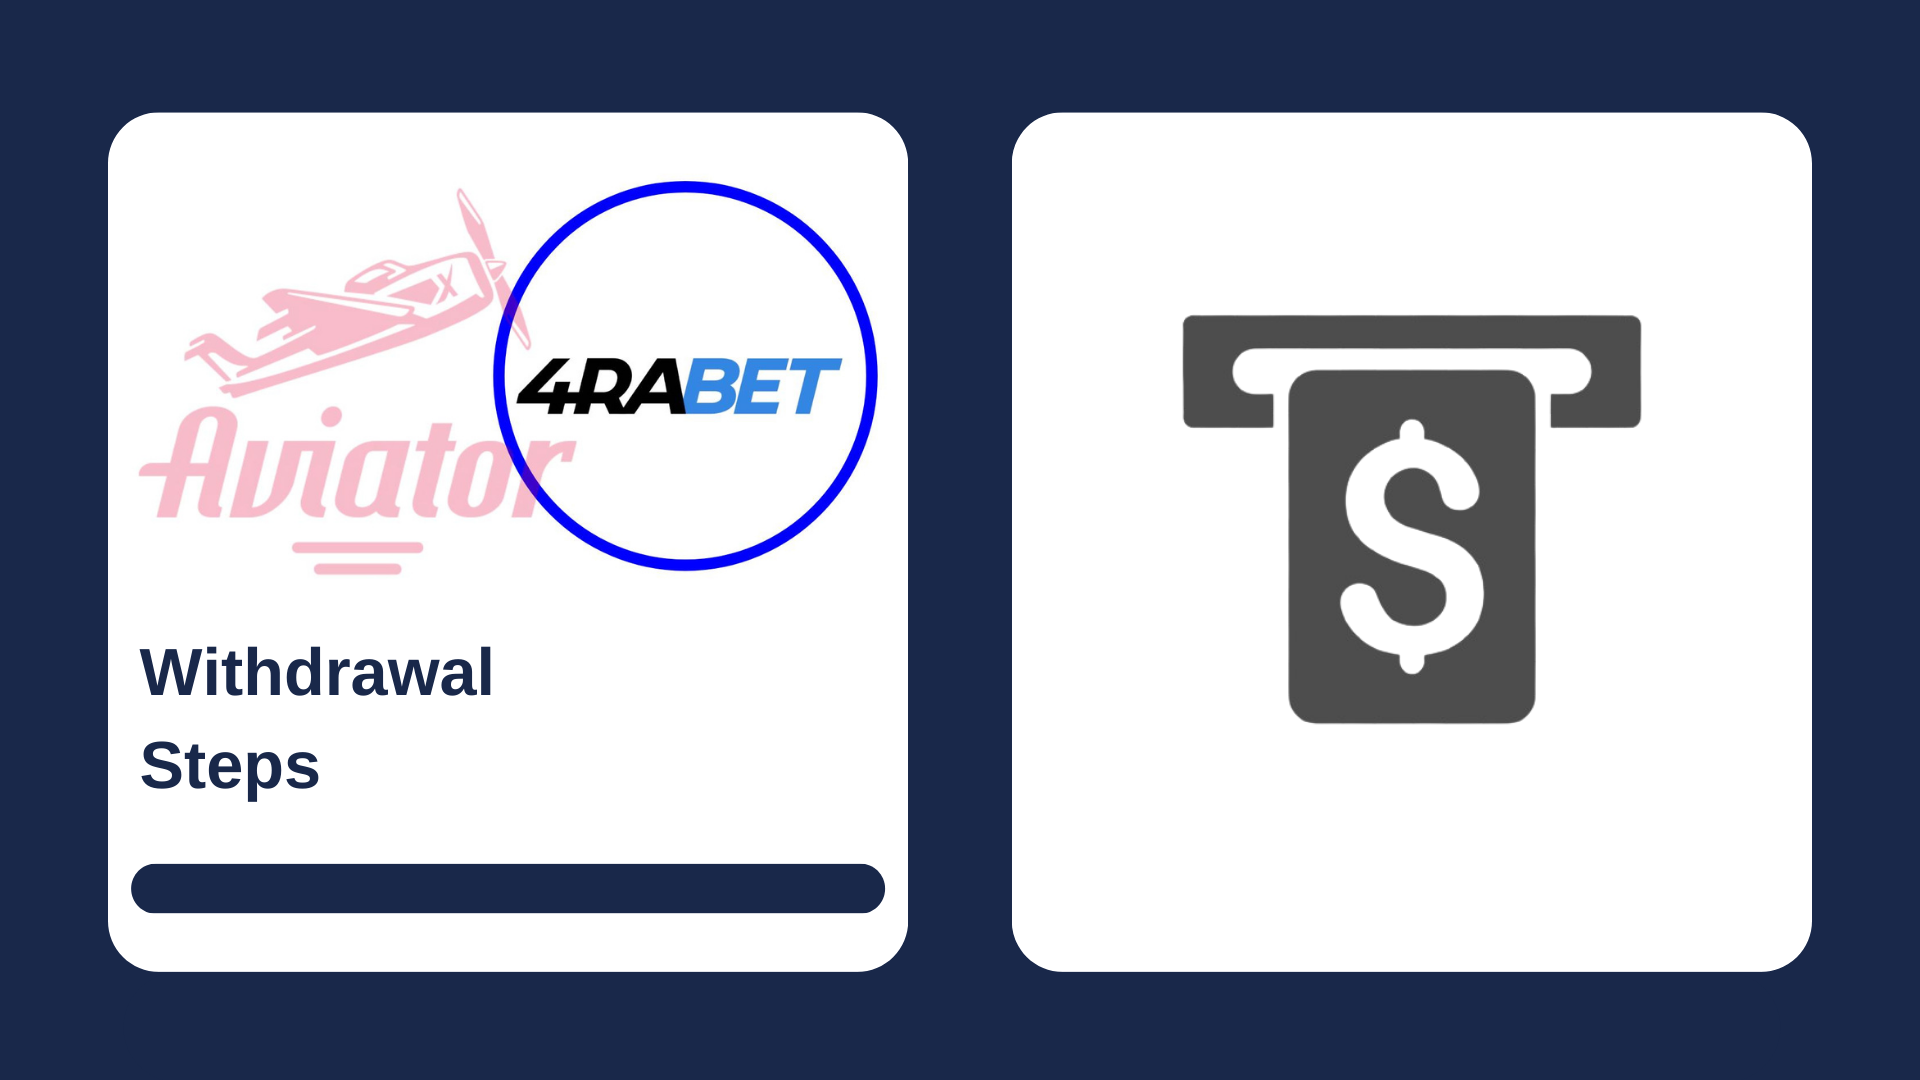 First picture showing Aviator and 4rabet logos with text, and second - withdrawal money icon